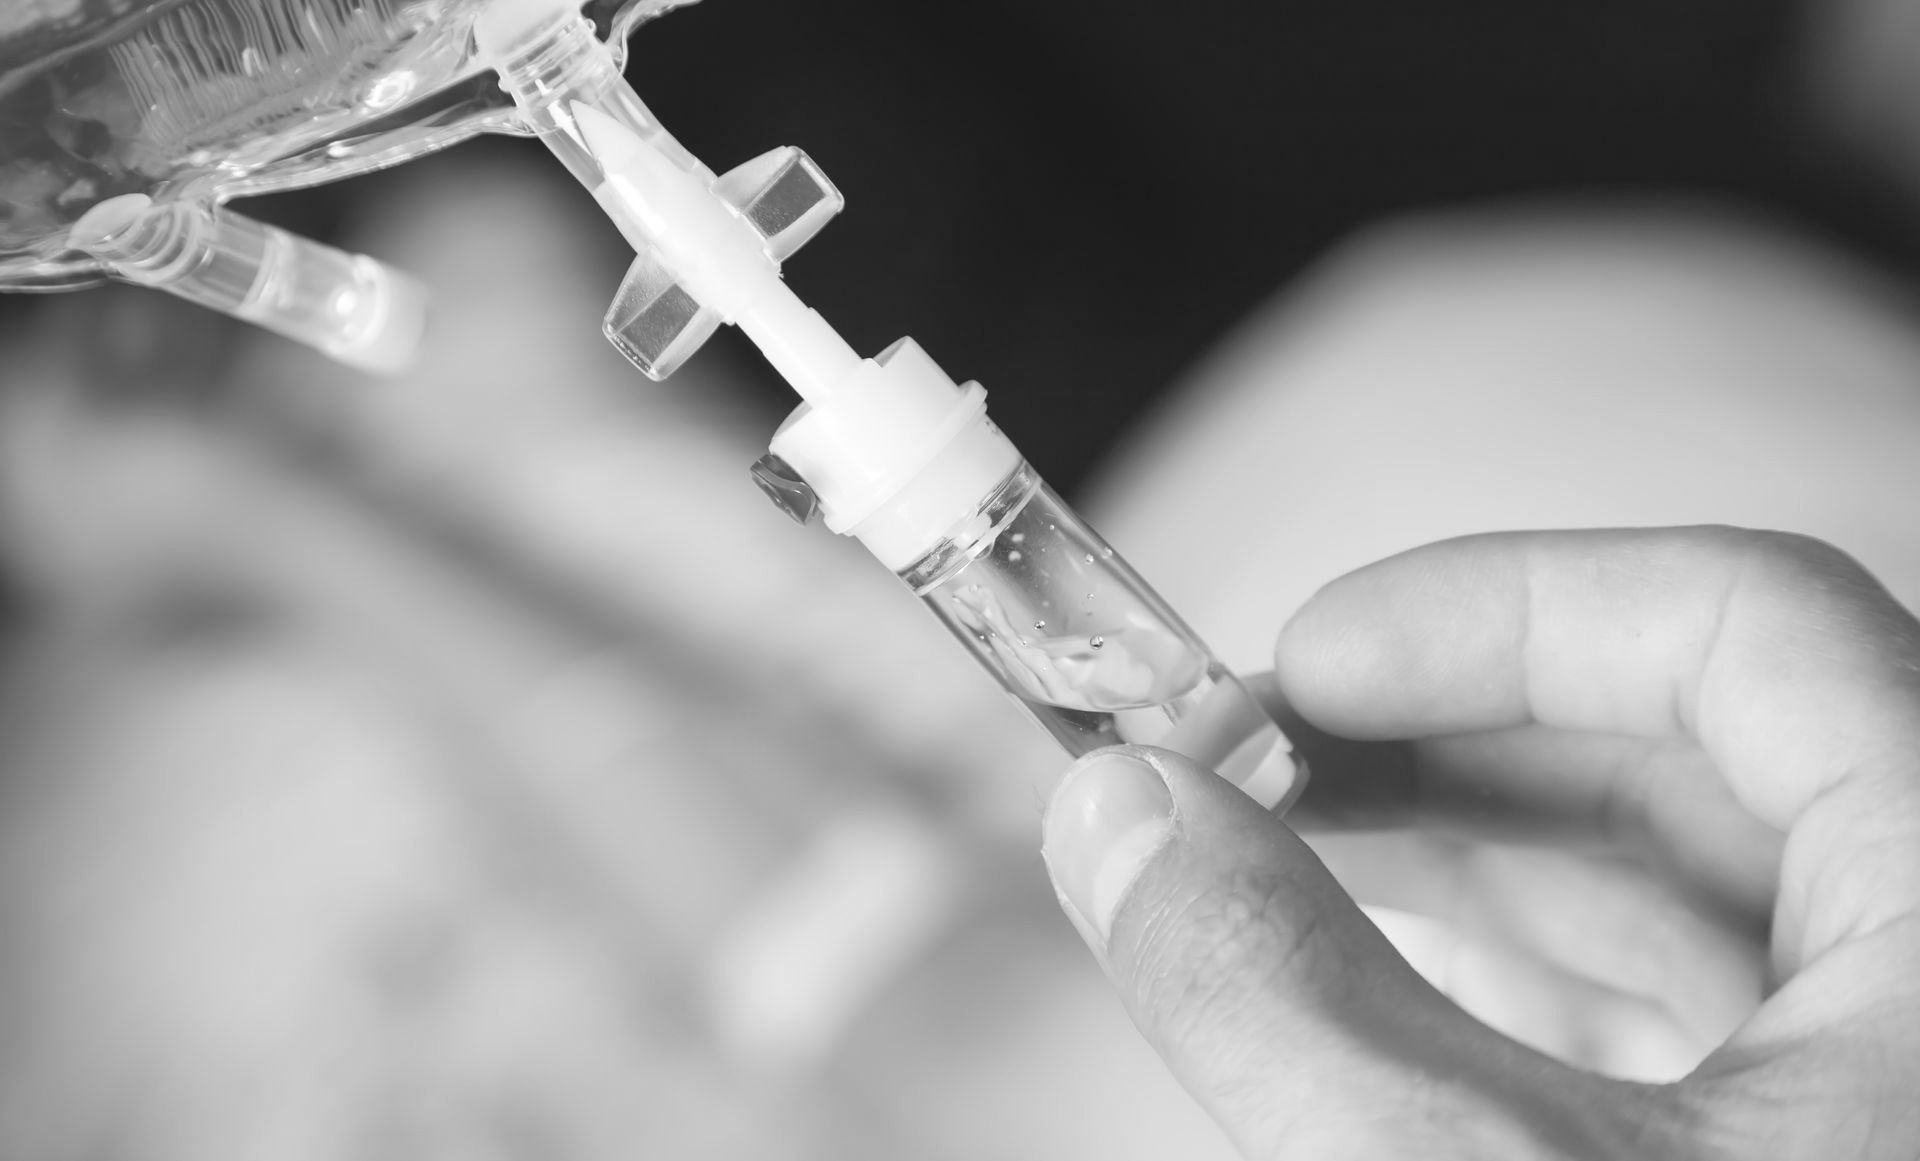 A person is holding a syringe with a drop of liquid in it.